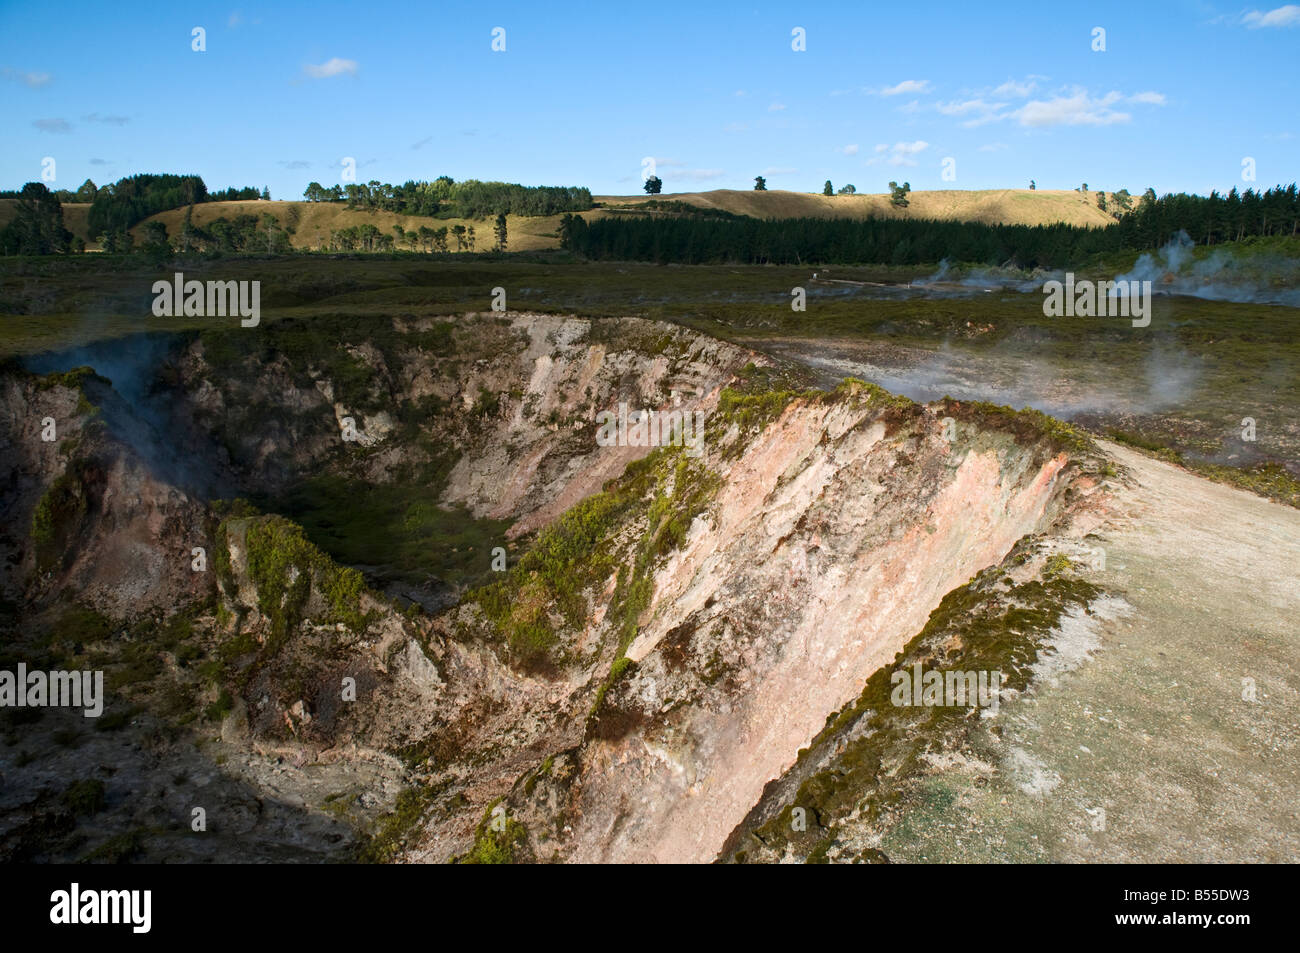 The Craters of the Moon geothermal area near Taupo, North Island, New Zealand Stock Photo